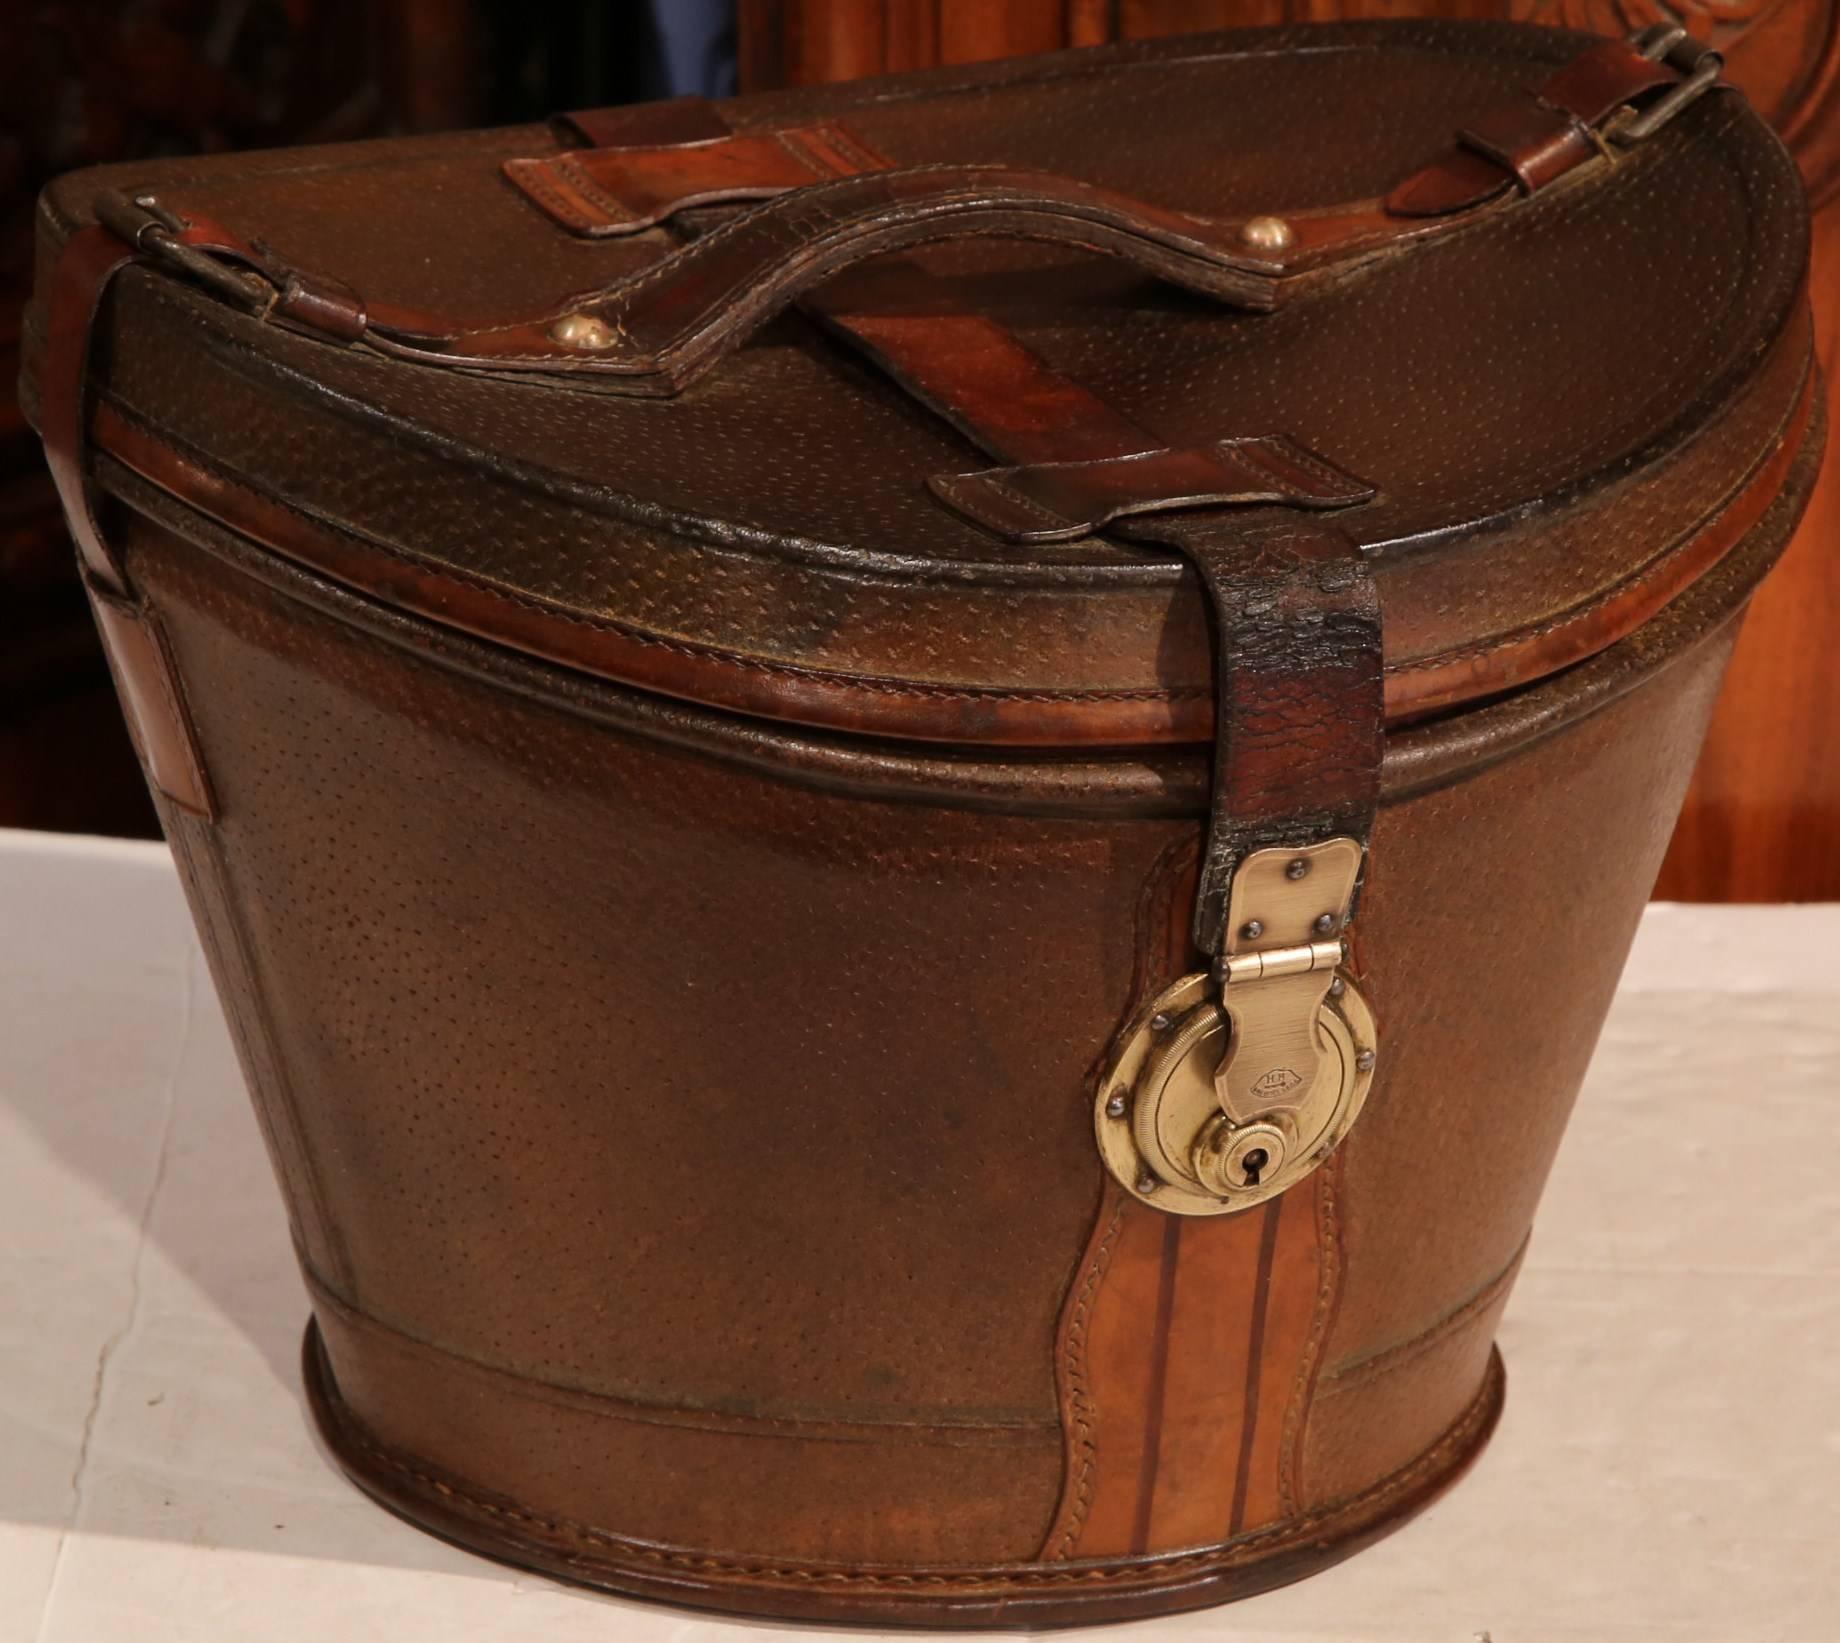 This exquisite, antique pigskin hat box was crafted in France, circa 1790. This locked leather box is in wonderful condition and is outfitted with a brass lock, leather straps and handle, and also has its original interior fabric. The piece is in